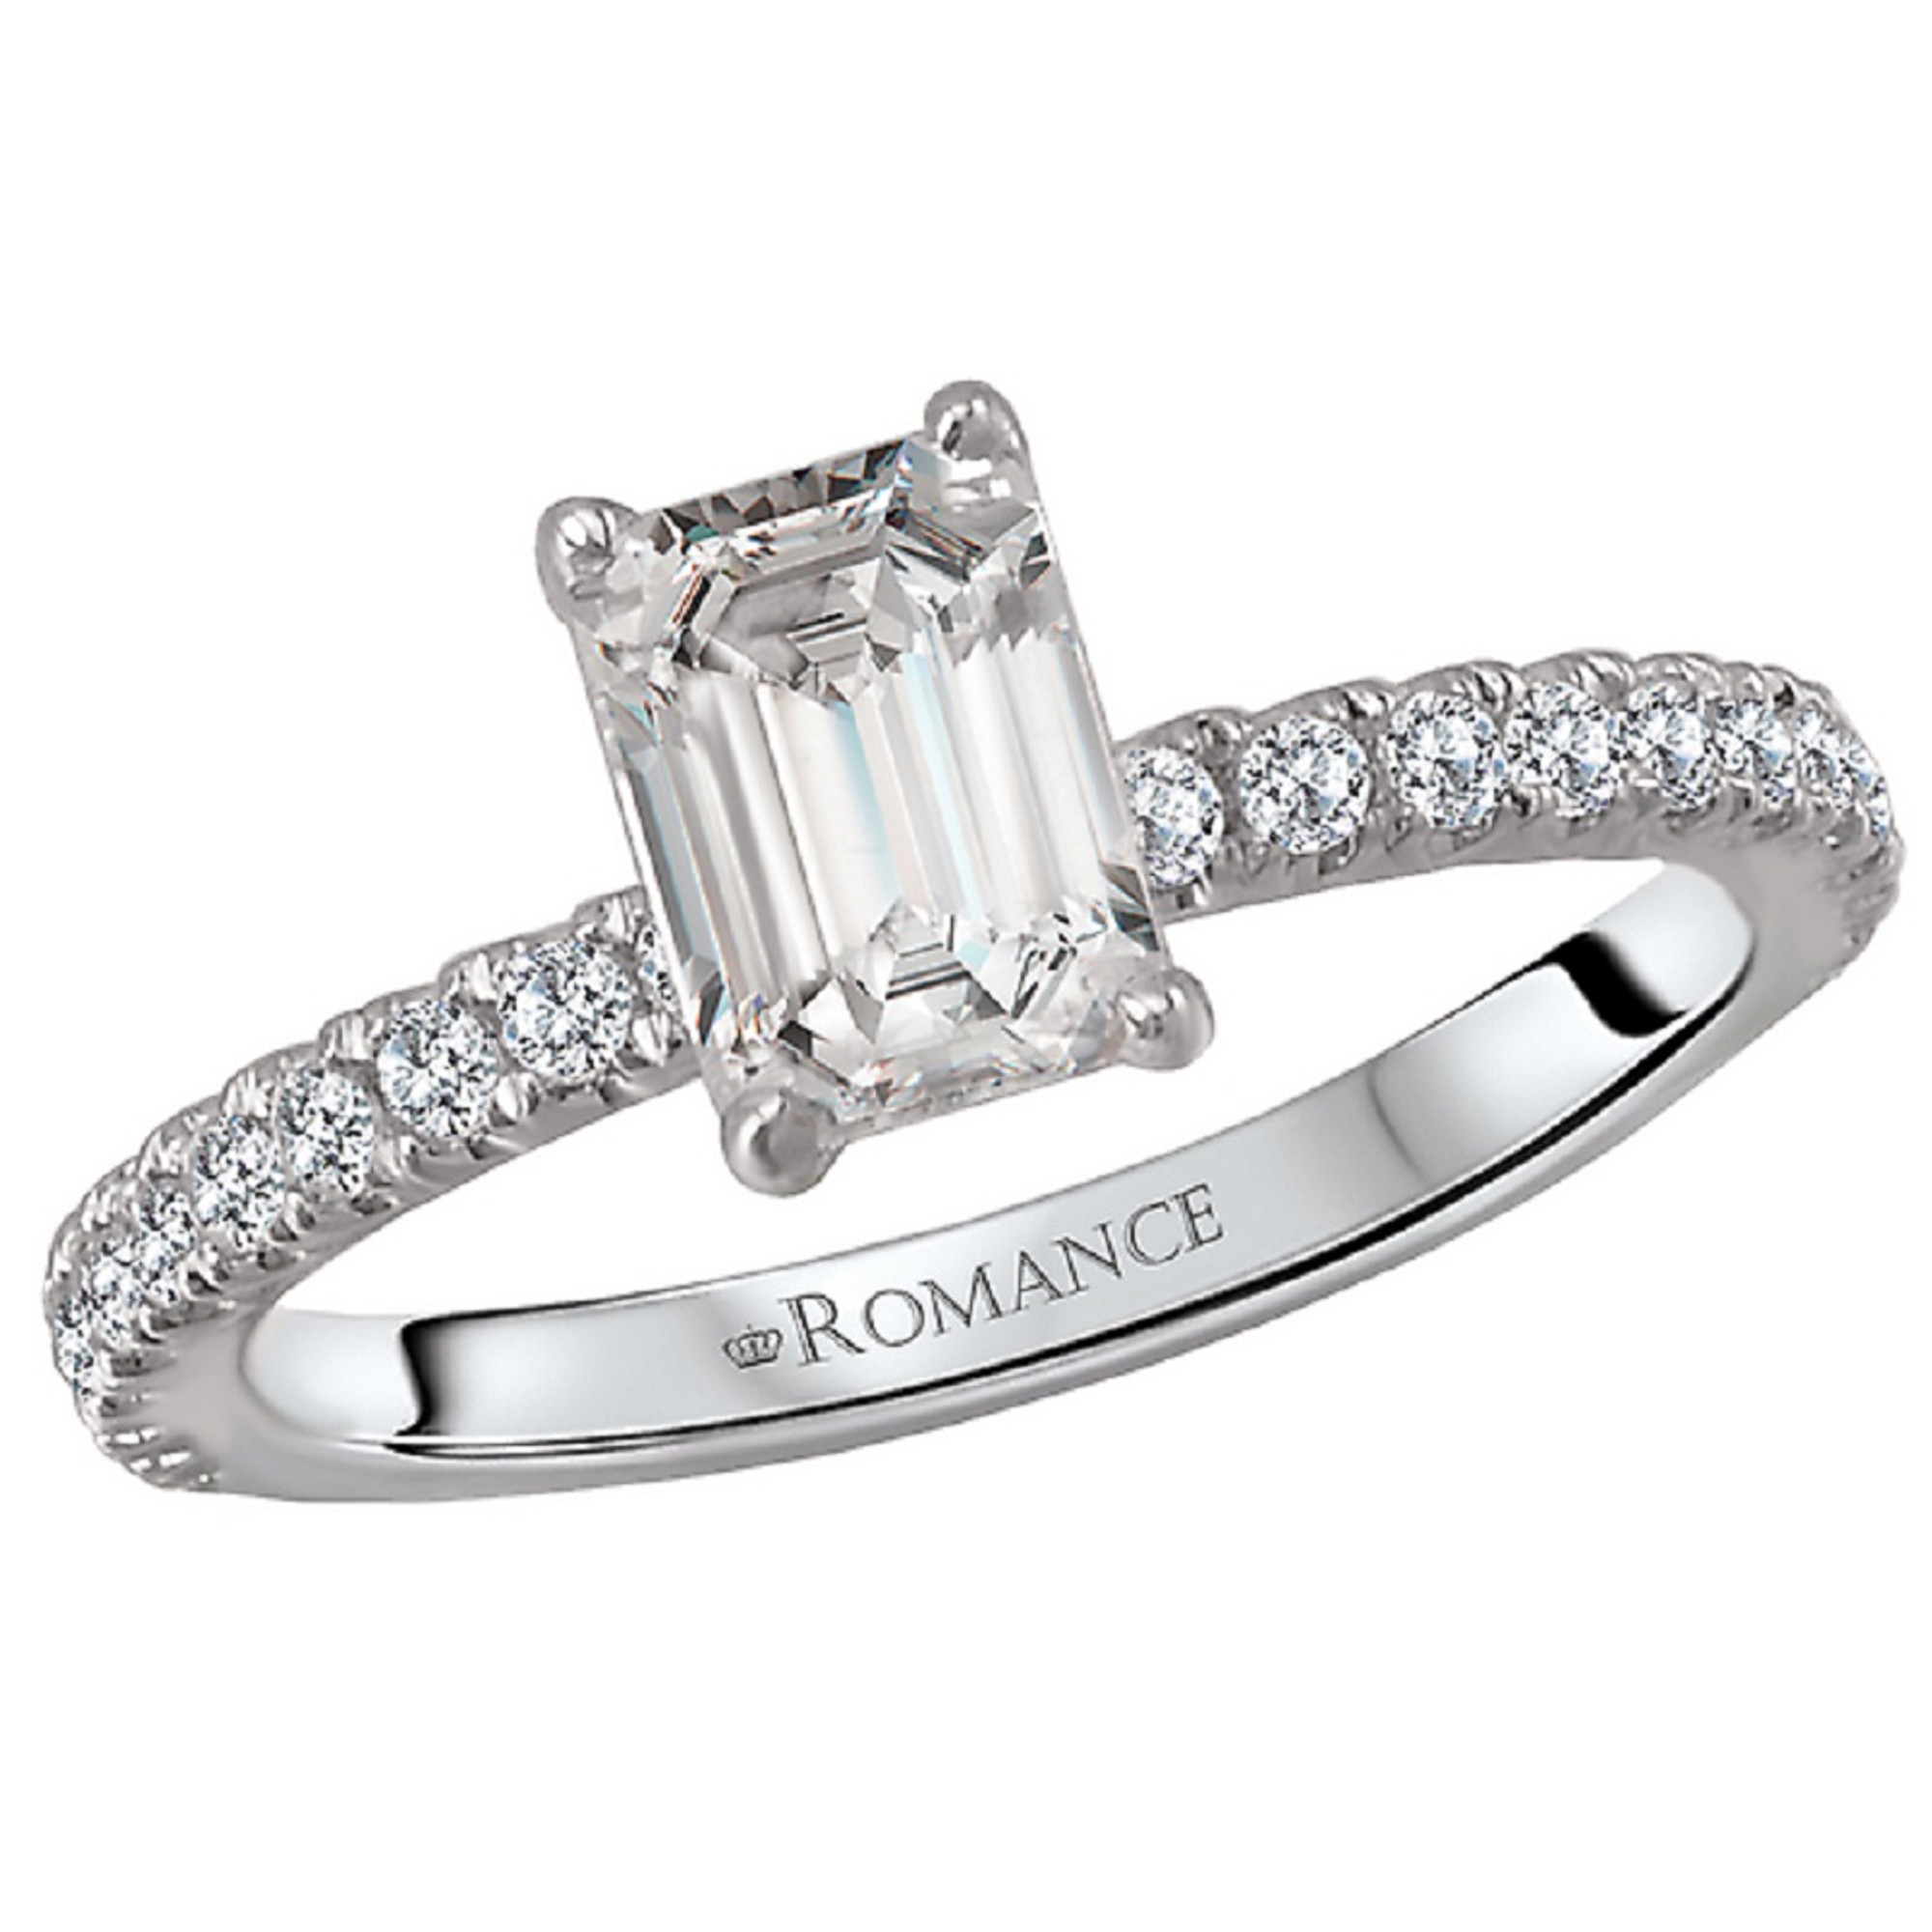 18k White Gold and Diamond Engagement Ring by Romance